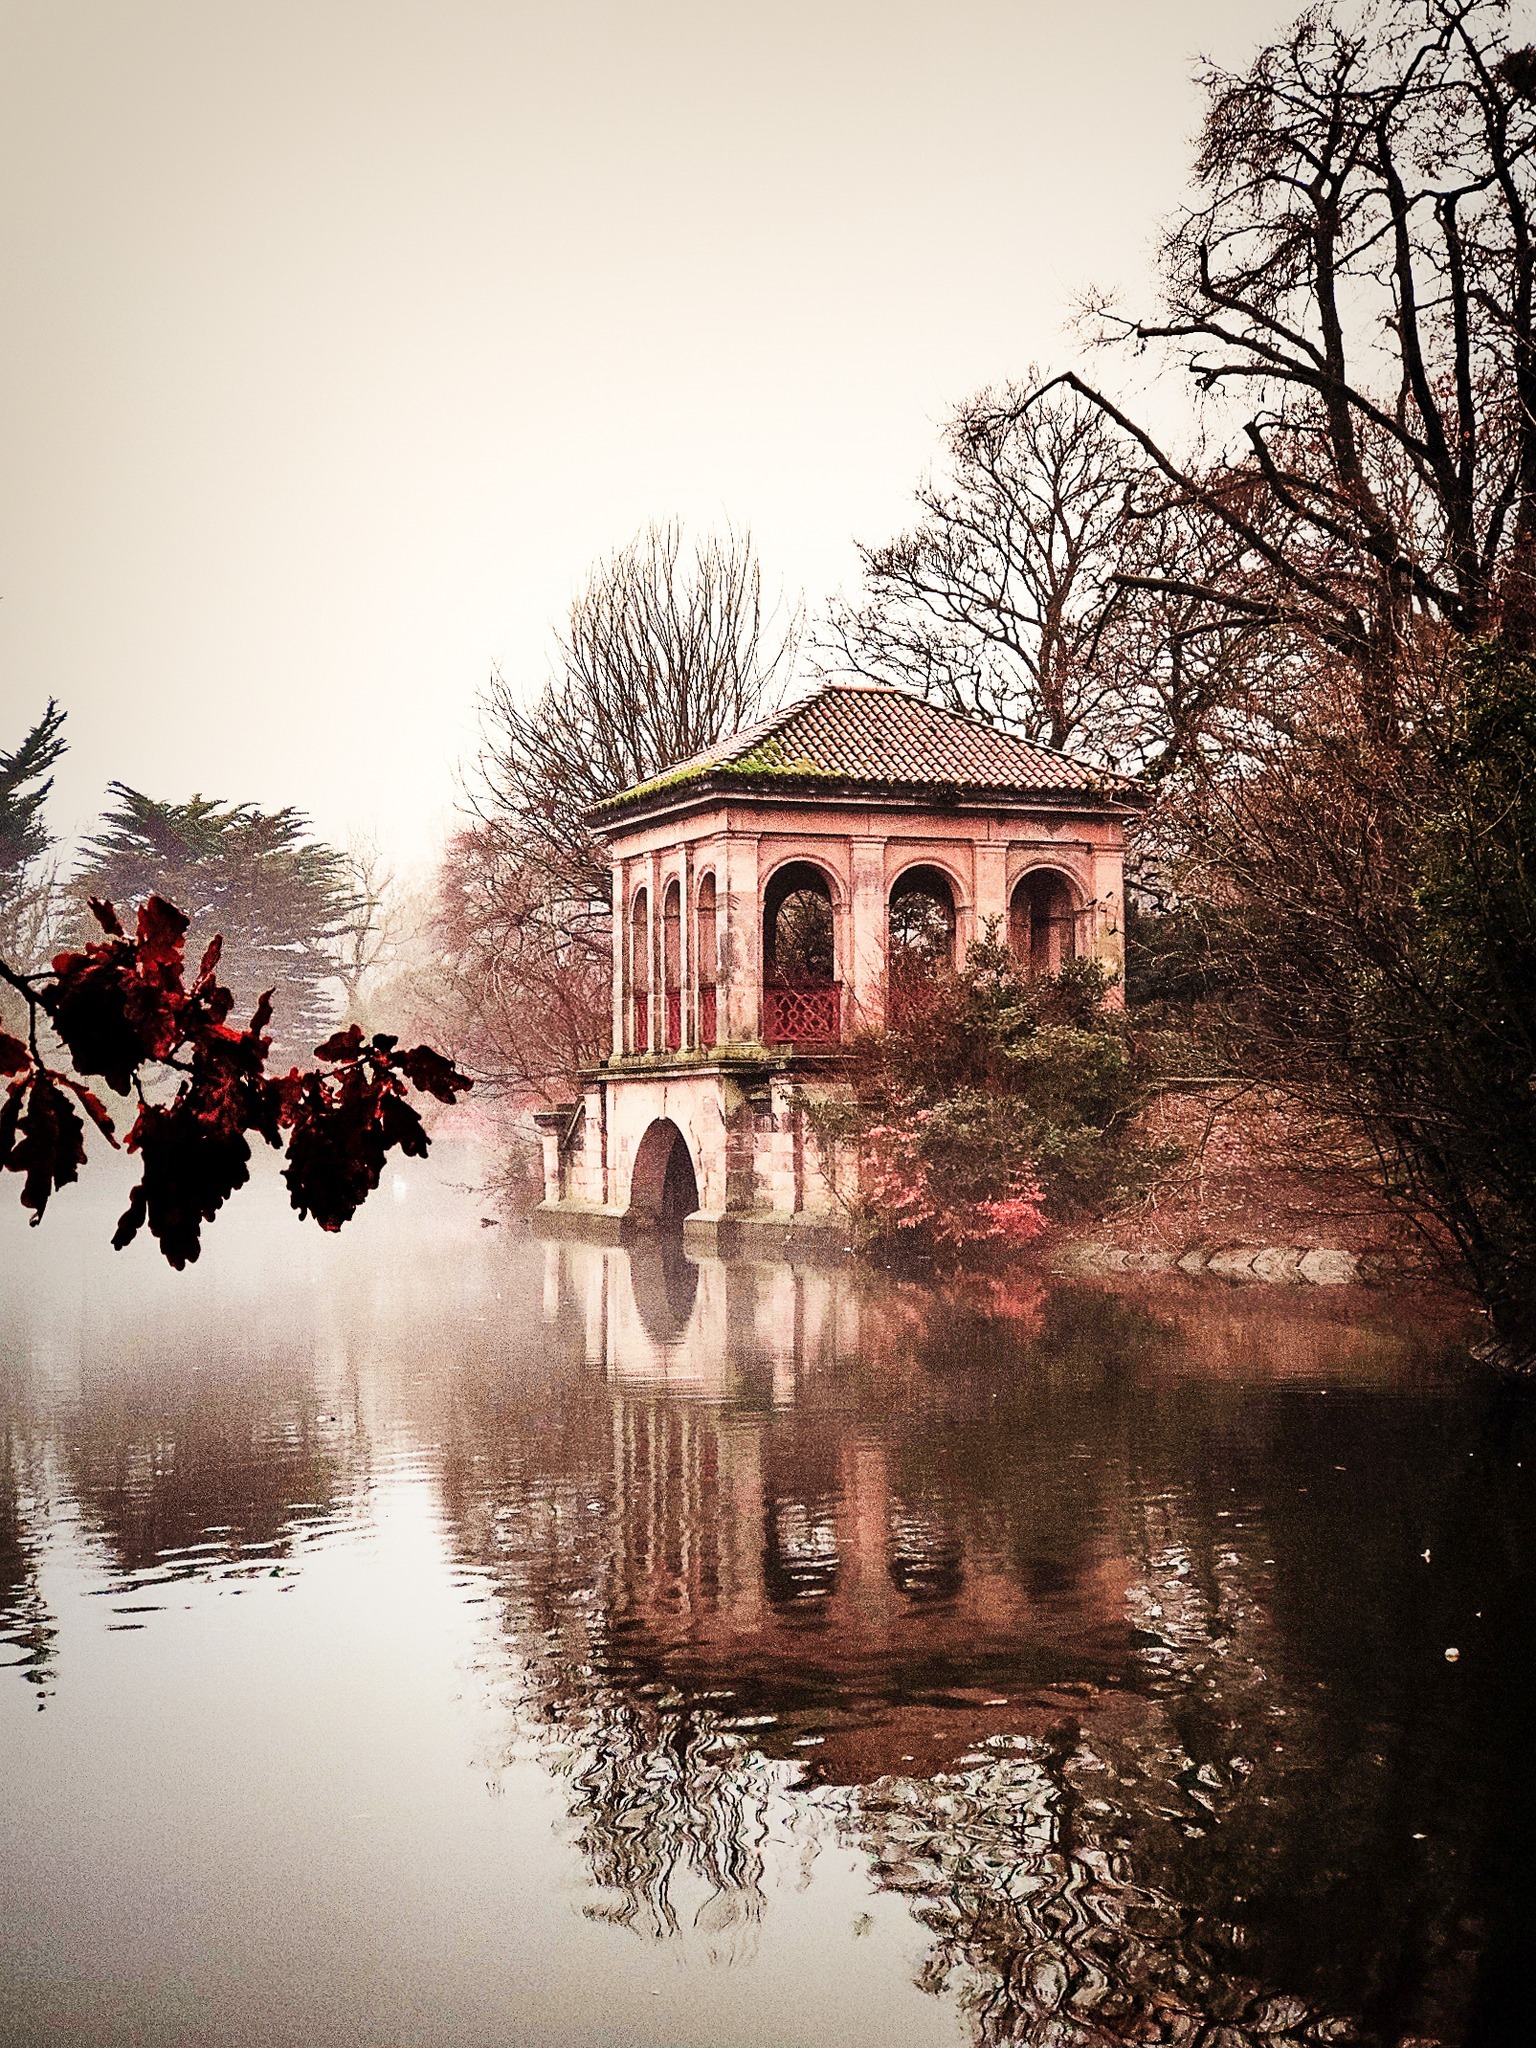 One foggy morning at Birkenhead Park by Claire Garroch